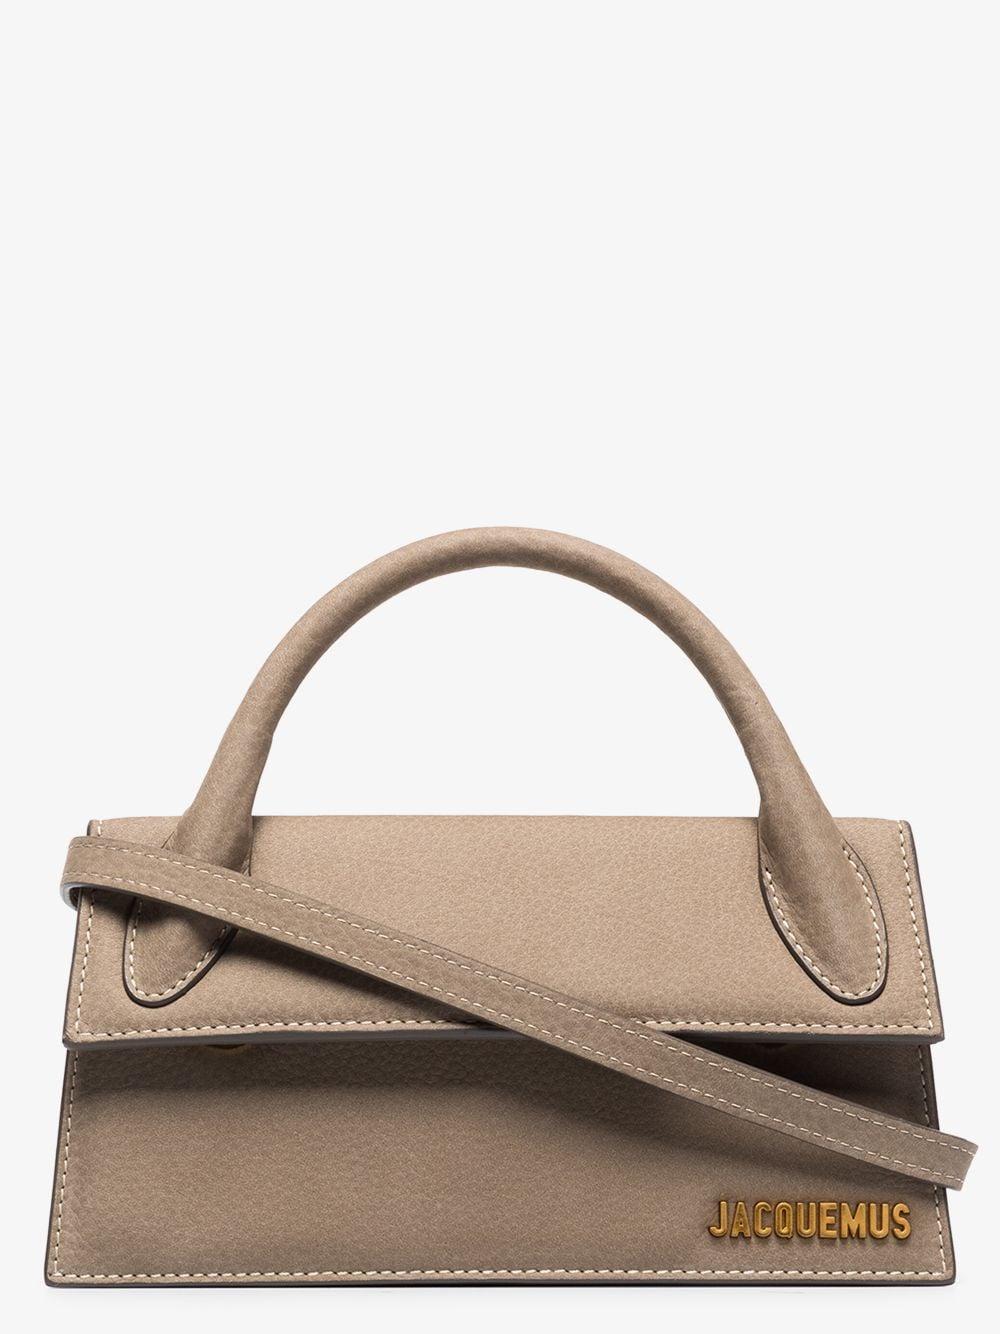 Jacquemus Le Chiquito Long Suede Tote Bag in Gray